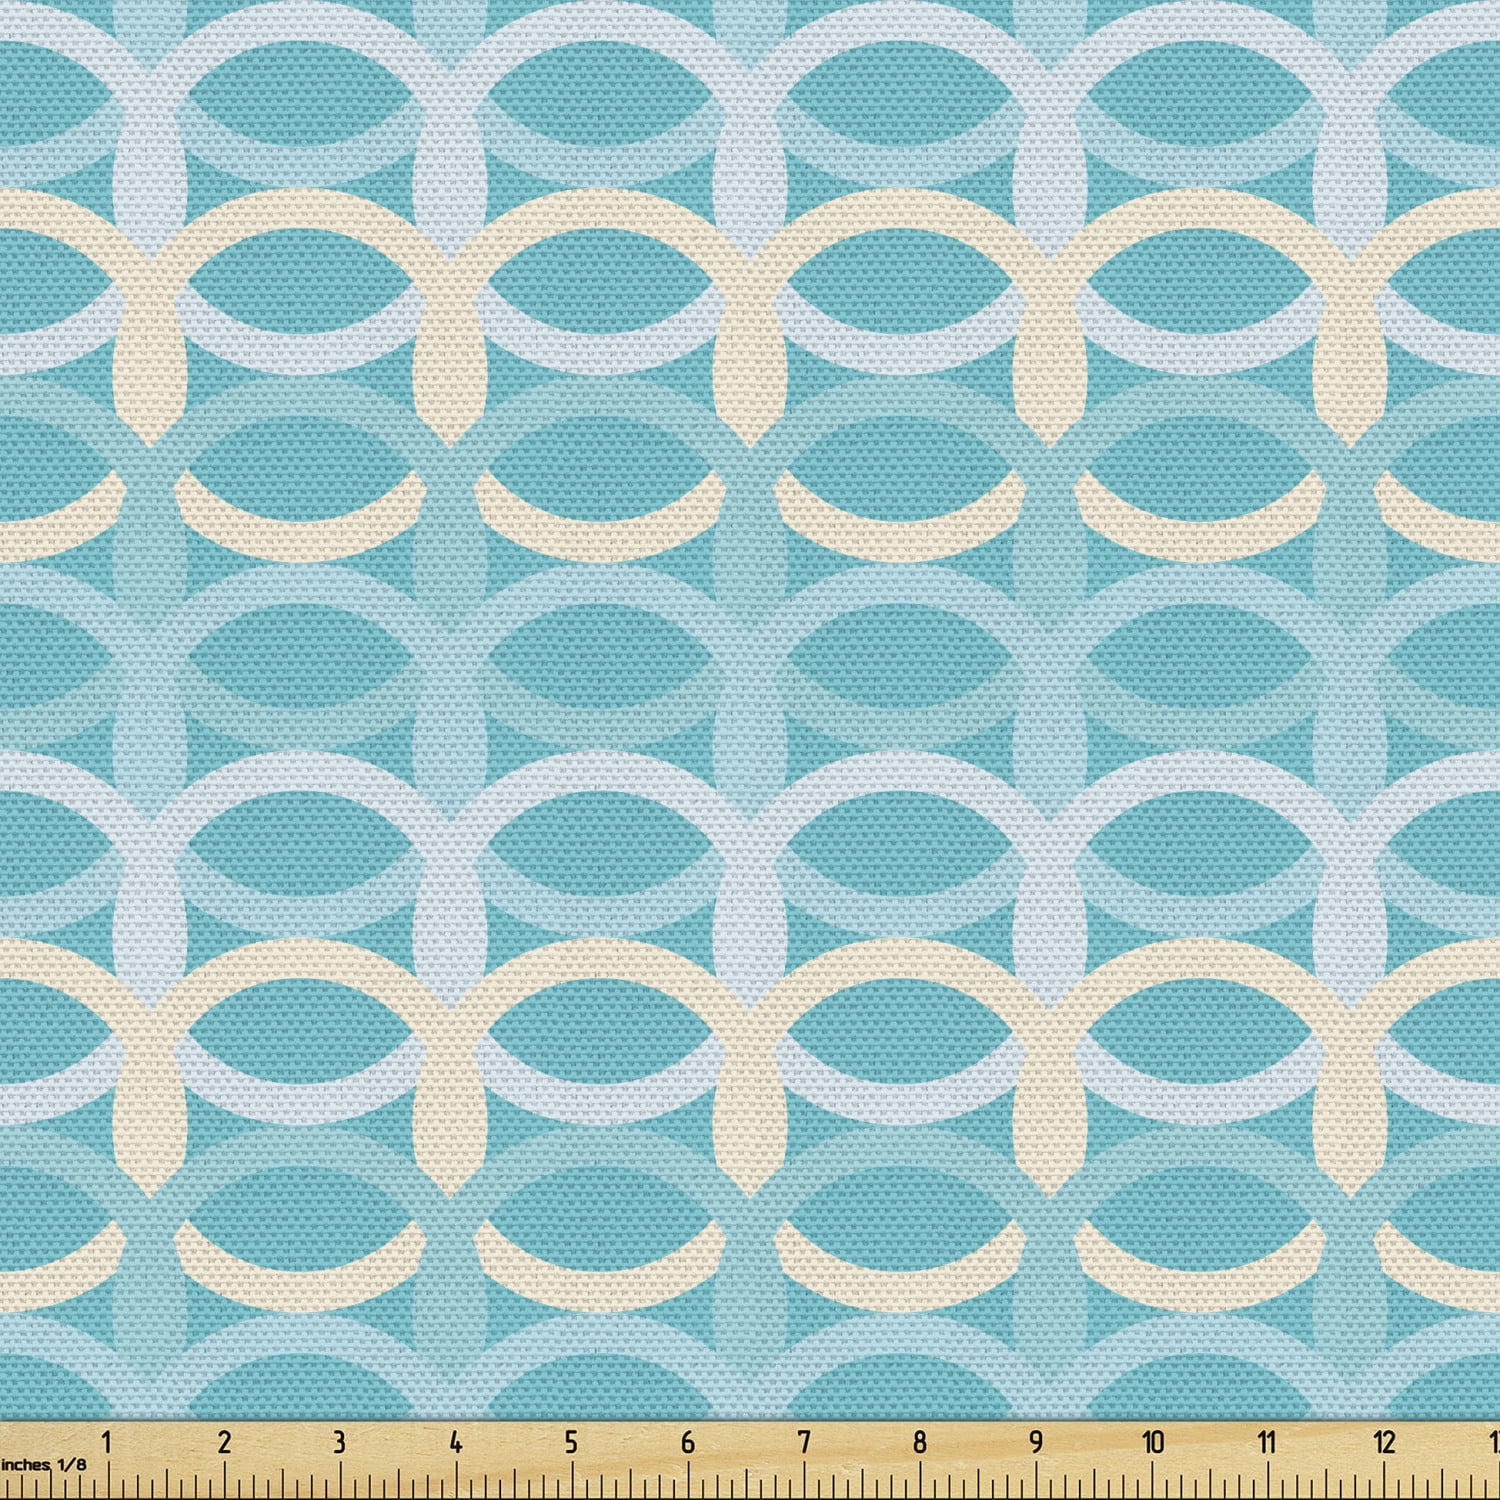 Abstract Upholstery Fabric by the Yard, Abstract Modernistic Rings Sphere  Motif Homespun, Decorative Fabric for DIY and Home Accents, Seafoam White  by Ambesonne